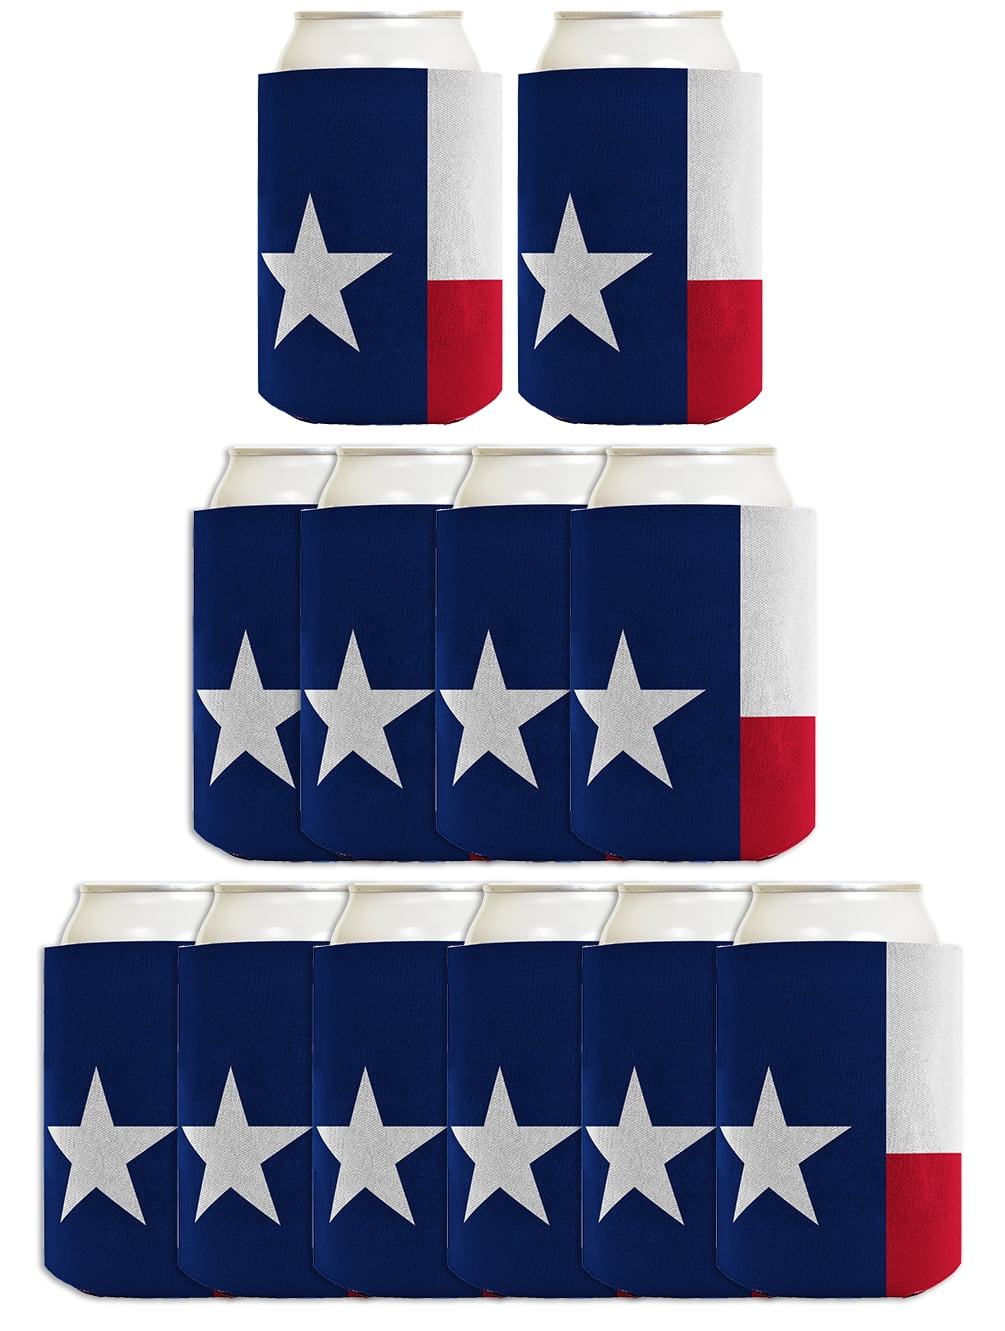 HOUSE OF PARTY 4th of July Can Koozies | 6PCS Beer Can Coolers Sleeves Bulk  for Soda Drink Bottles | Red White Blue Patriotic Fourth of July Can